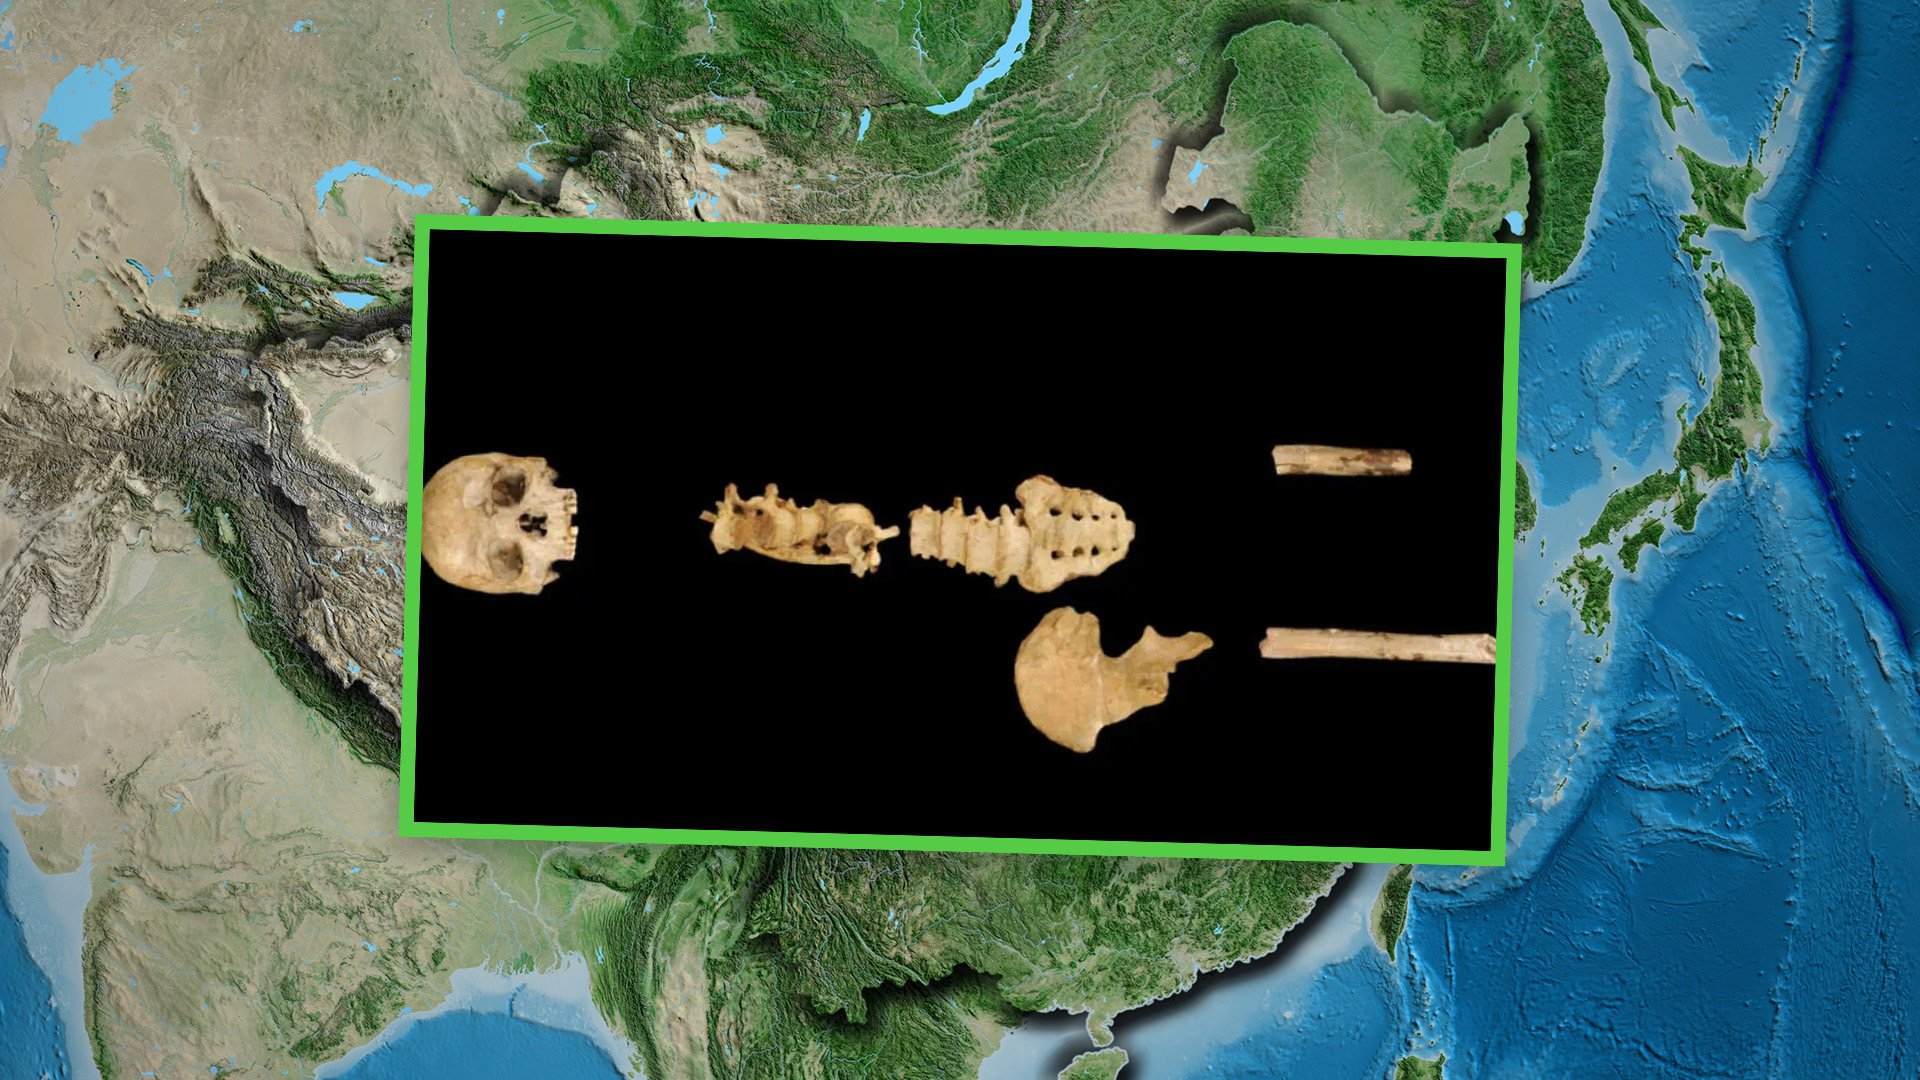 A skeleton from China, which was initially thought to be over 200,000 years old, turned out to be much younger than expected. Photo: SCMP composite/Shutterstock/J. Ge et al, Nature Communications